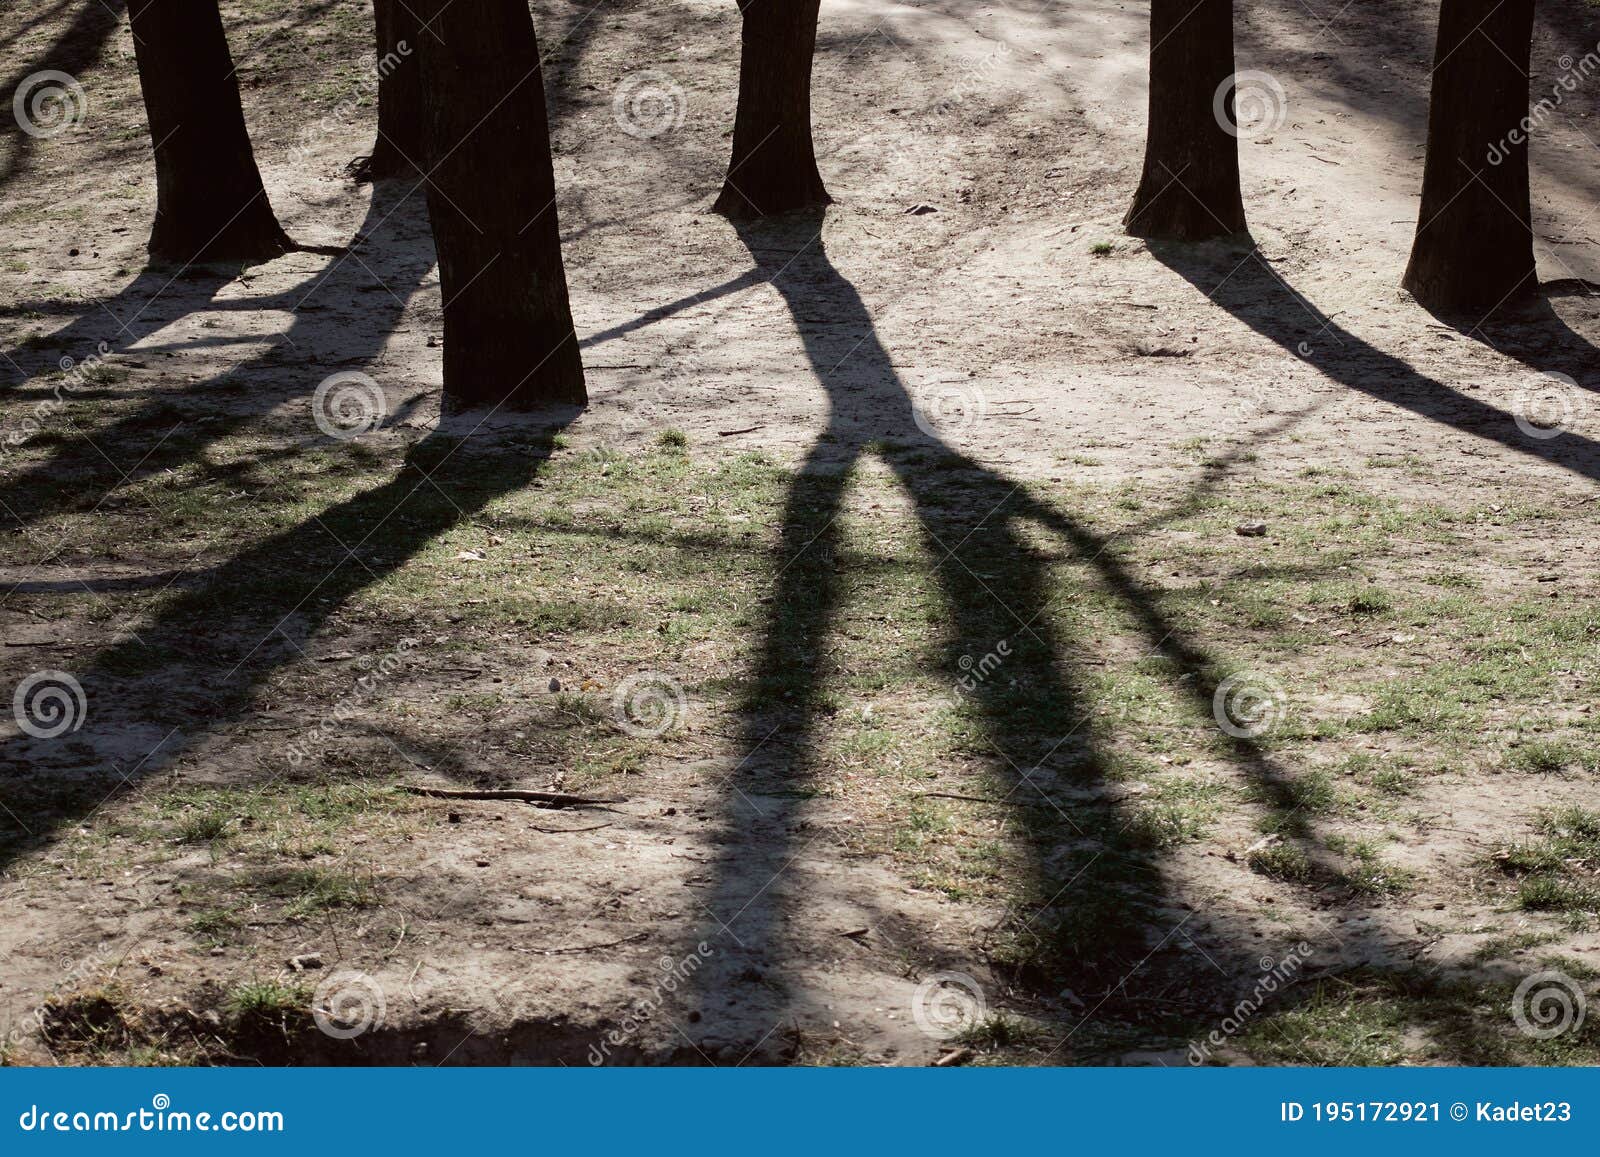 public park with tree shadows in spring. heaviness concept